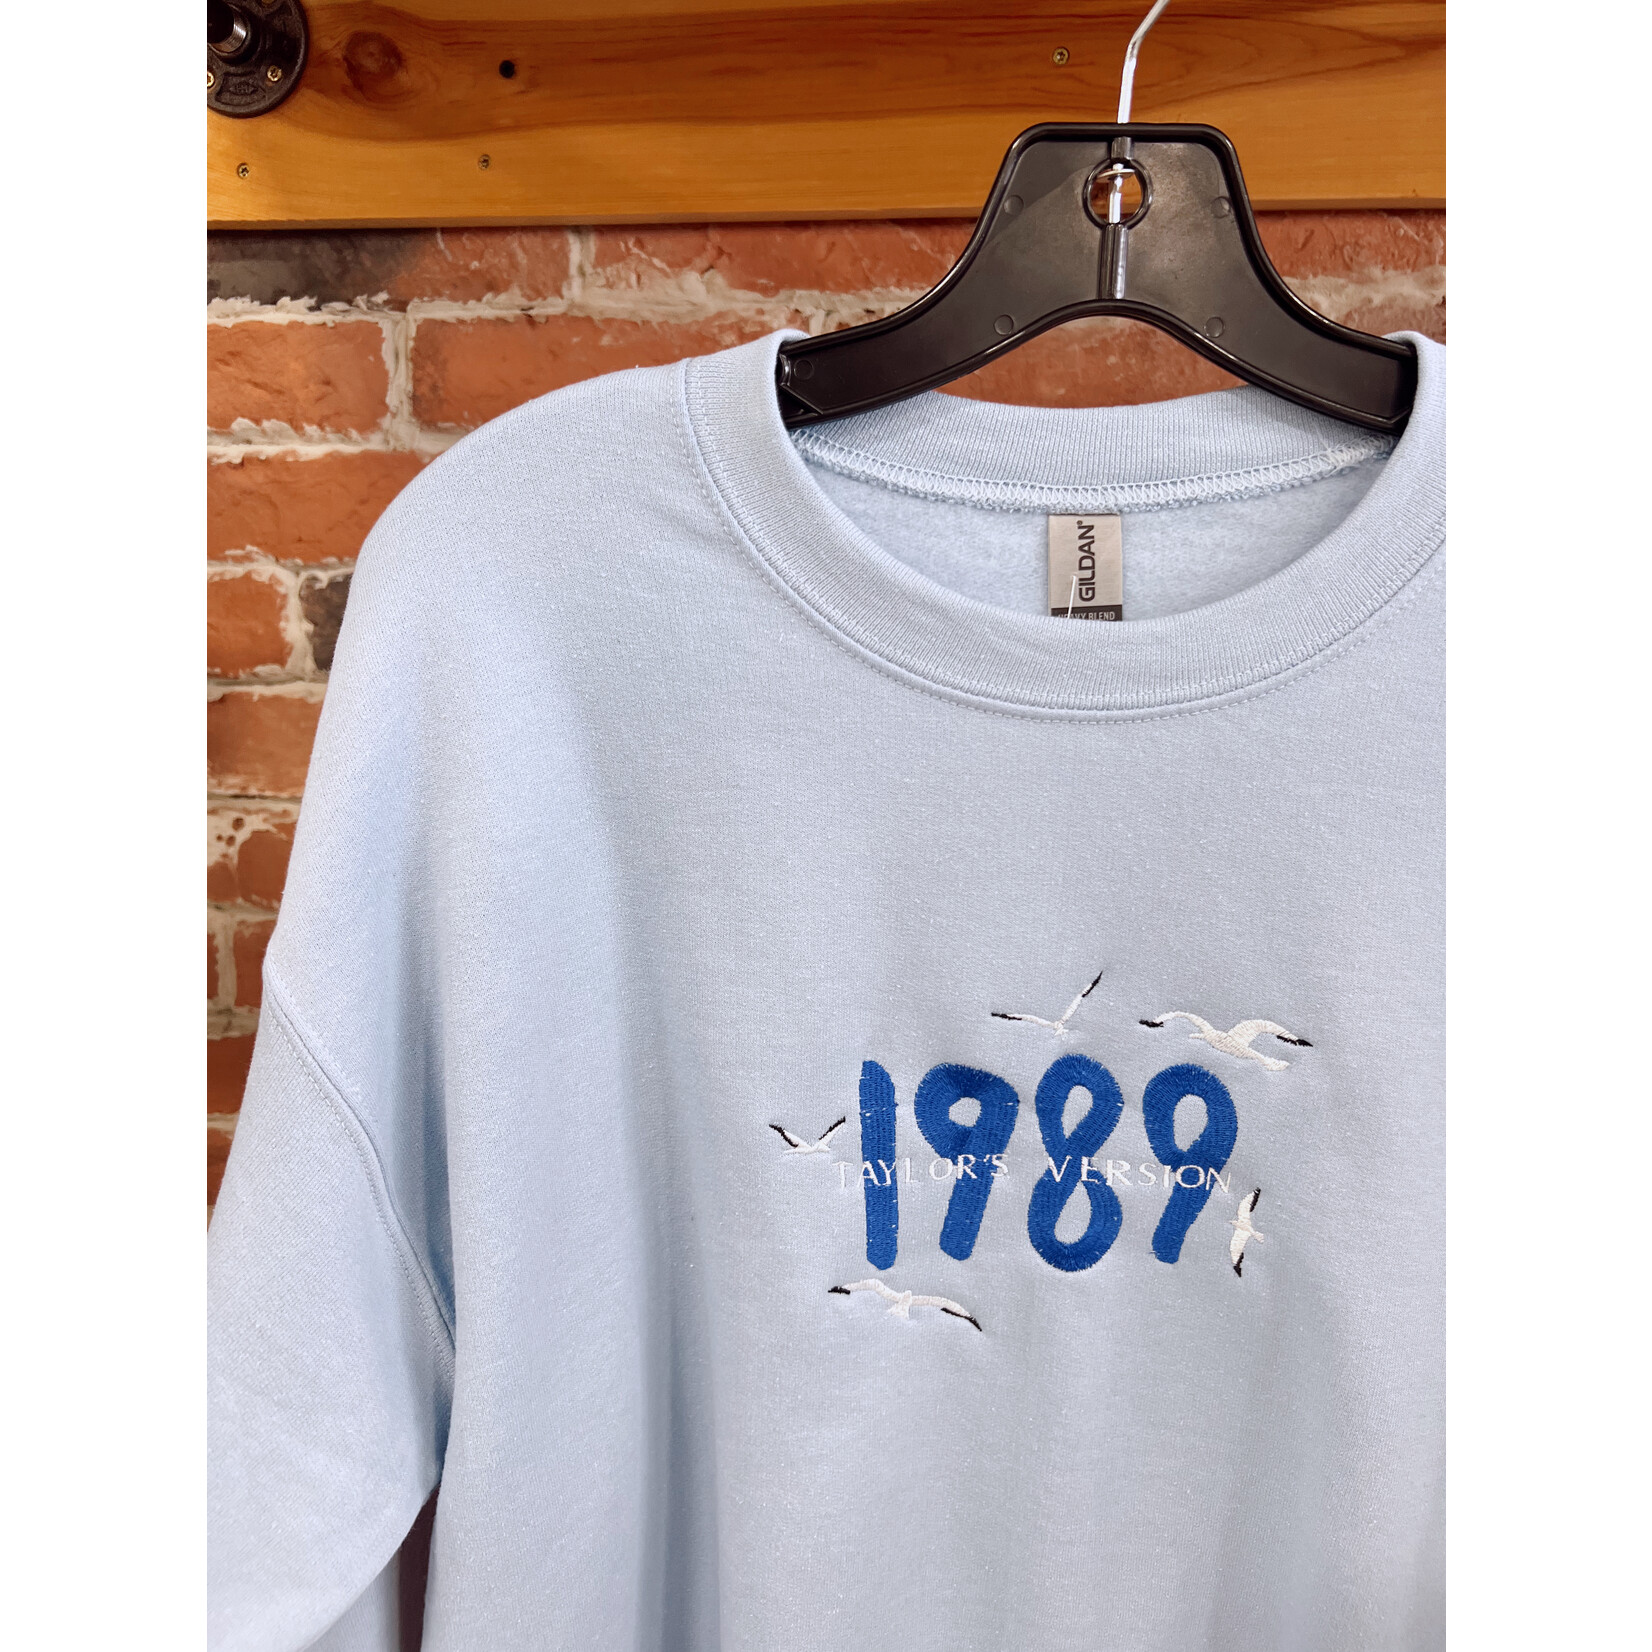 Taylor's Version Blue Embroidered Crew